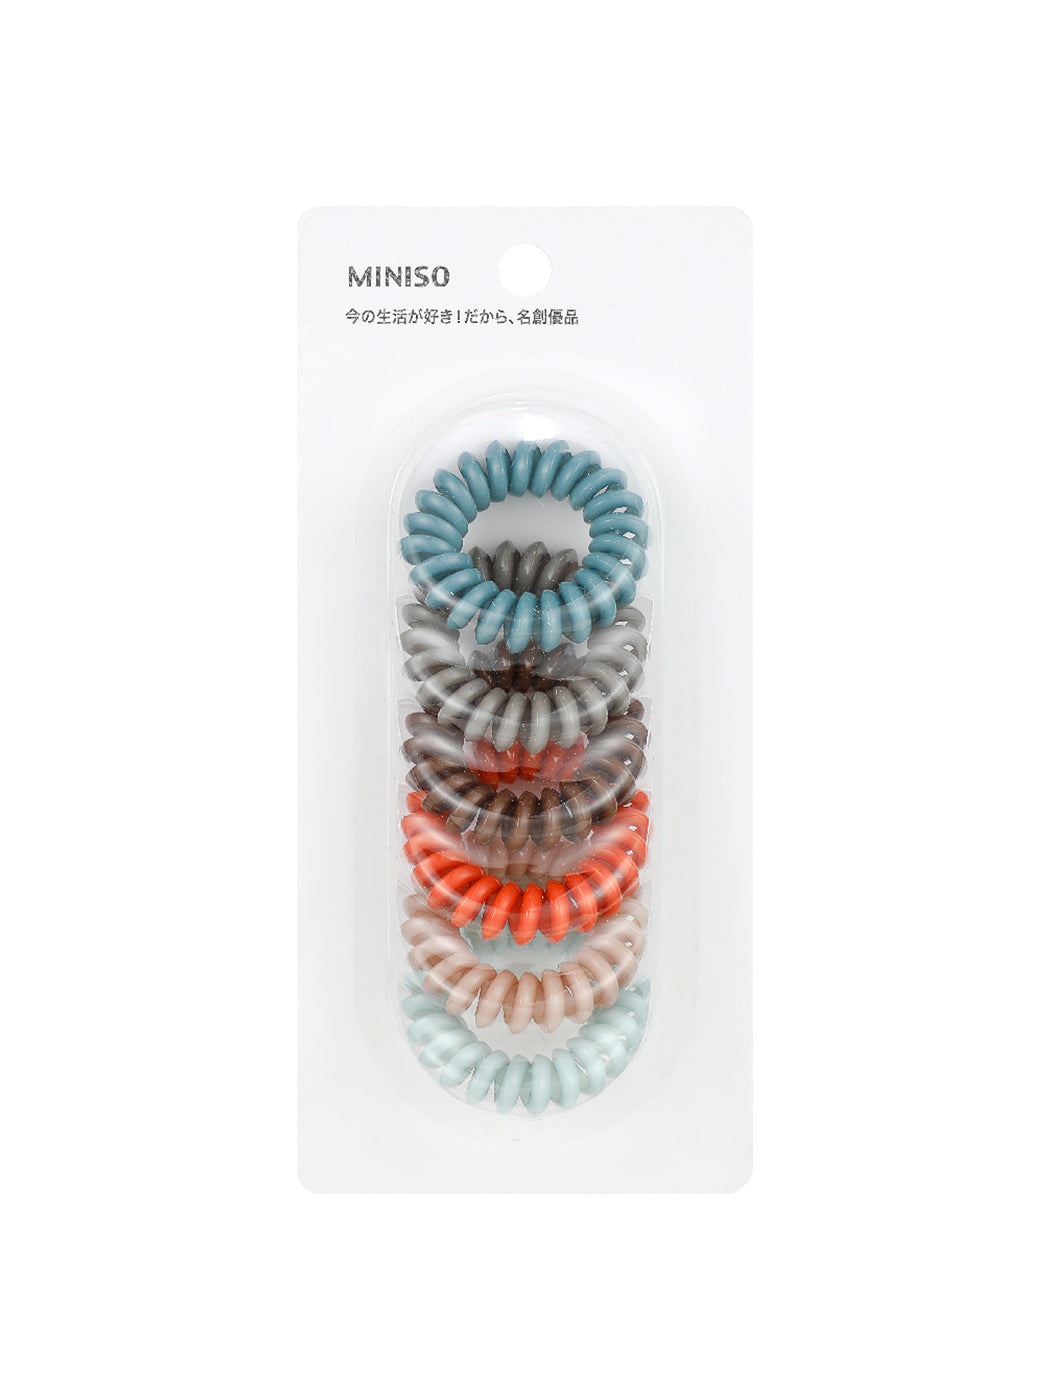 MINISO 4.0 COLORED SPIRAL HAIR TIES ( 6PCS ) 2007224910106 HAIR TIE